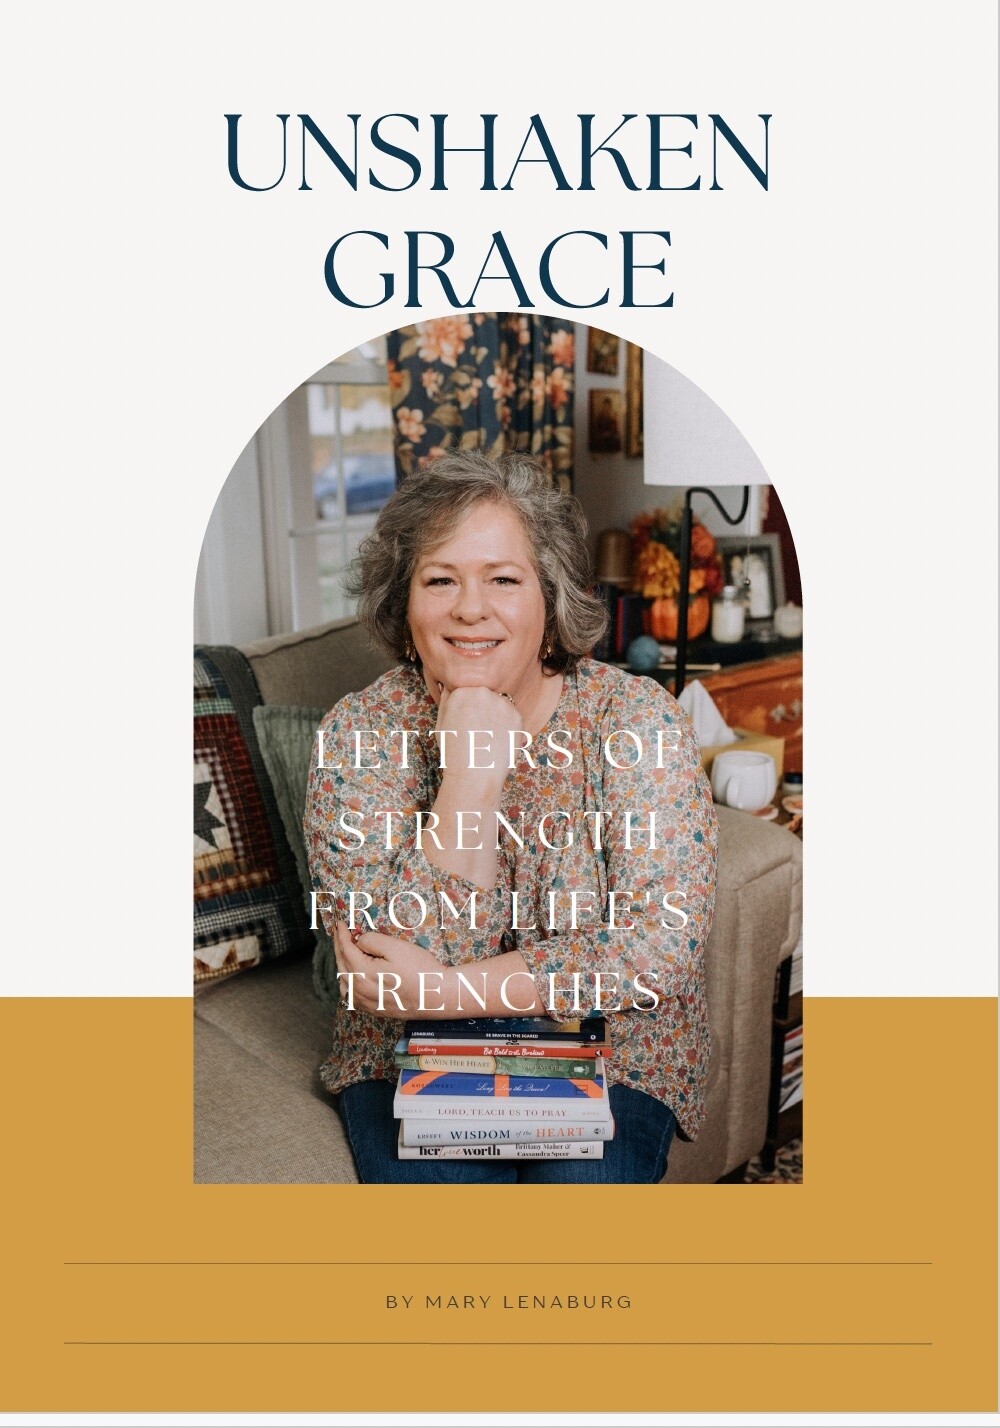 Unshaken Grace: Letters of Strength from Life's Trenches